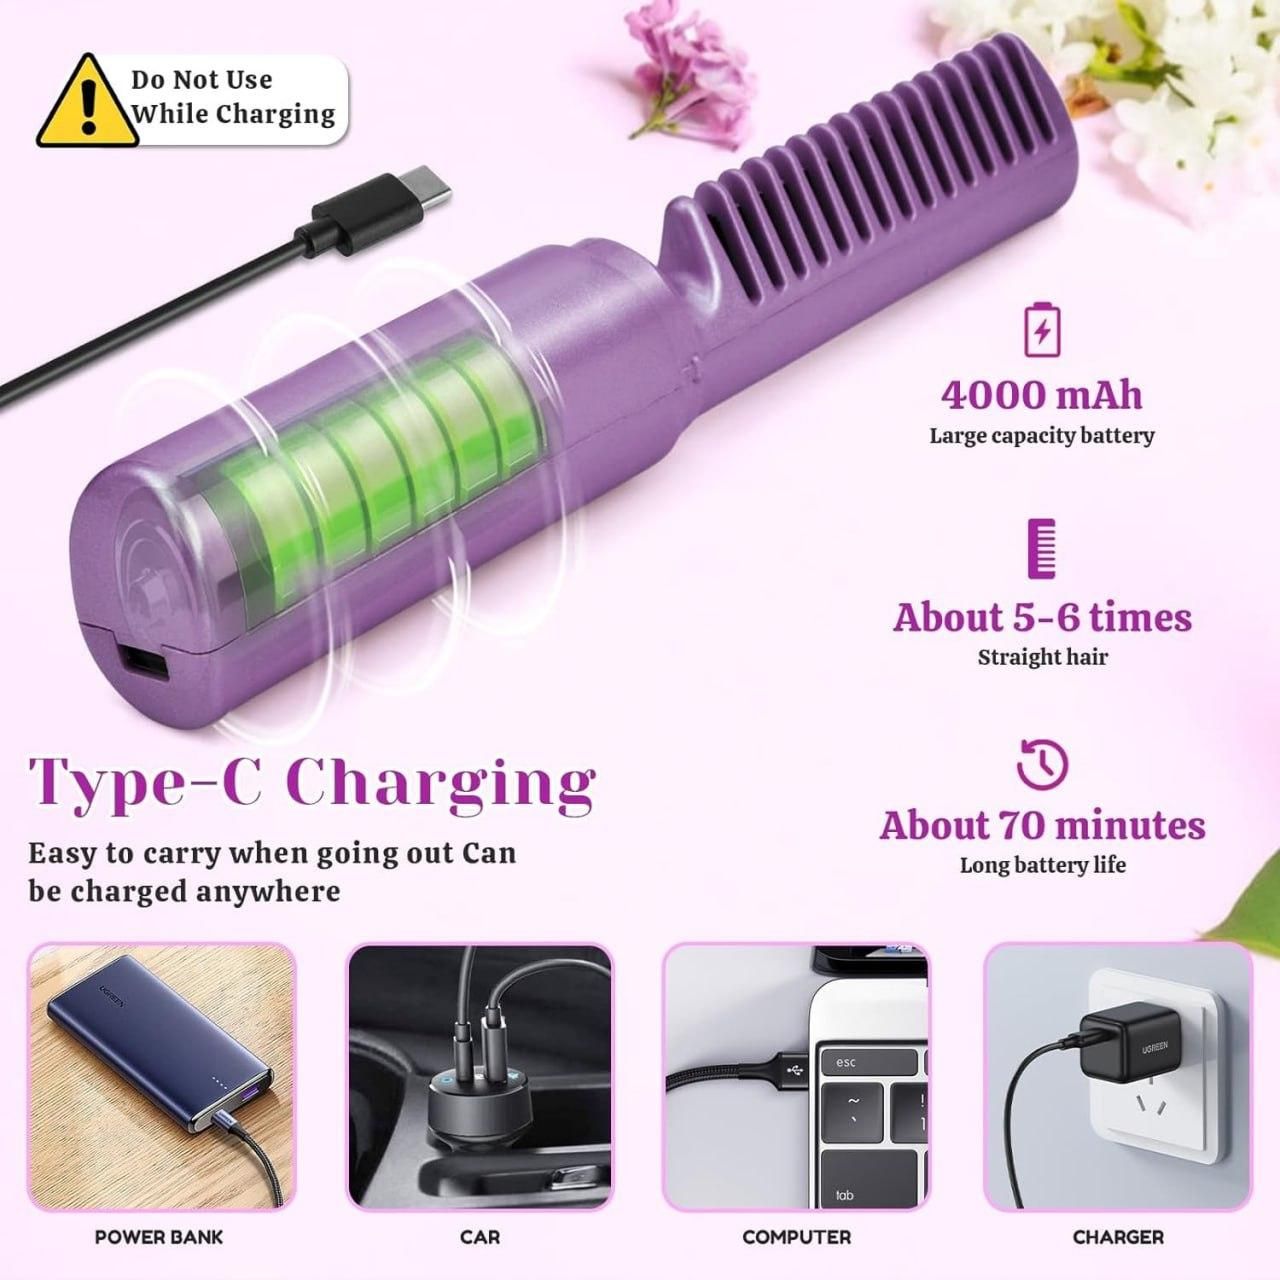 Portable Mini Hair Straightener | Cordless Rechargeable Comb